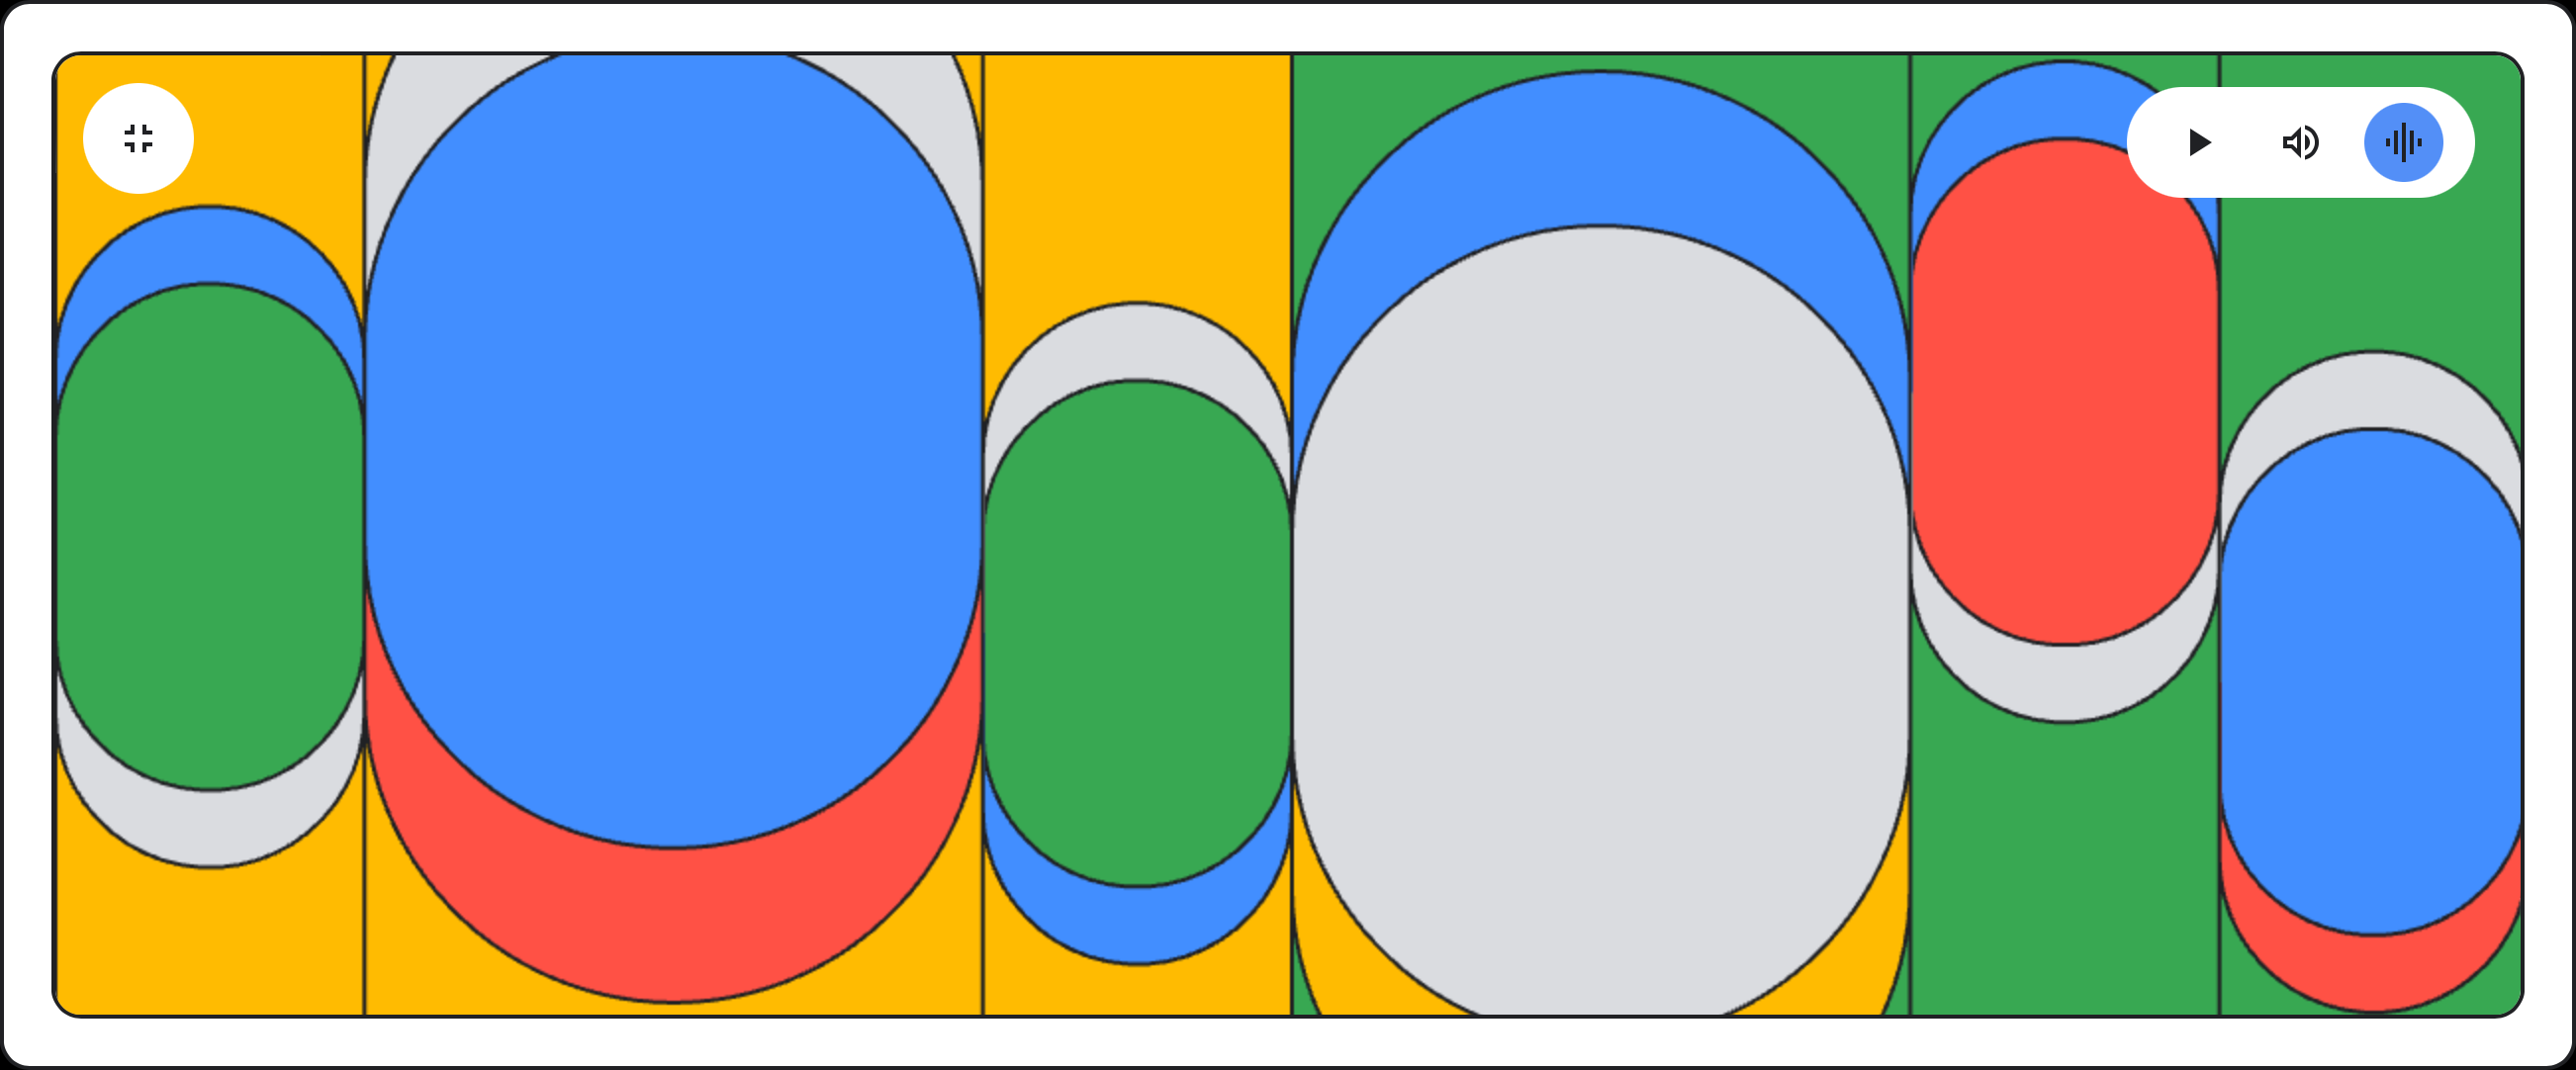 Abstract graphic in the Google color palette representing Google I/O 2023